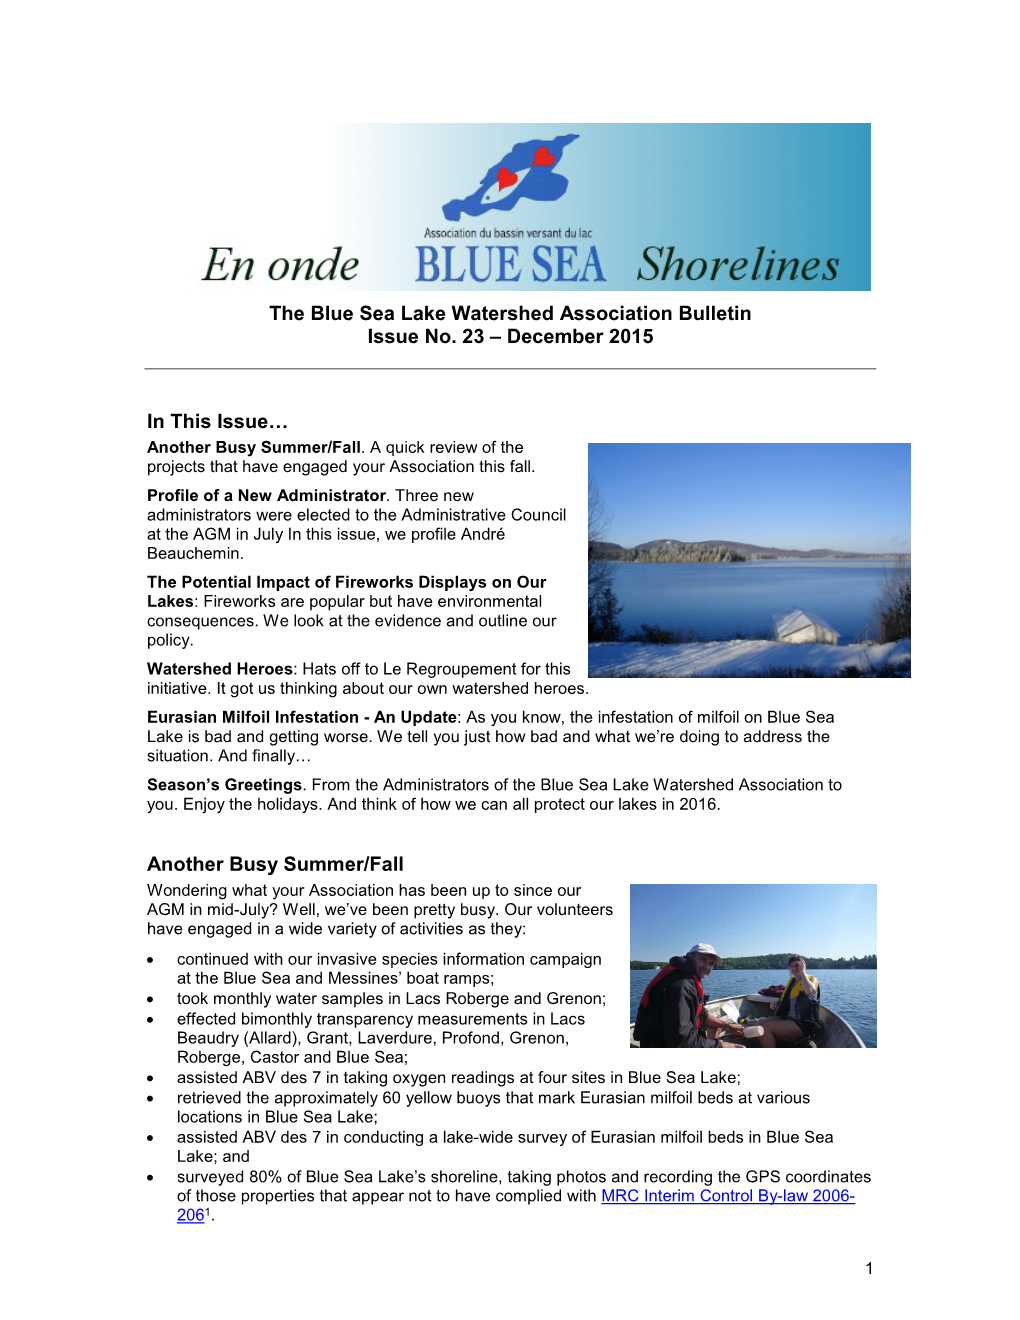 The Blue Sea Lake Watershed Association Bulletin Issue No. 23 – December 2015